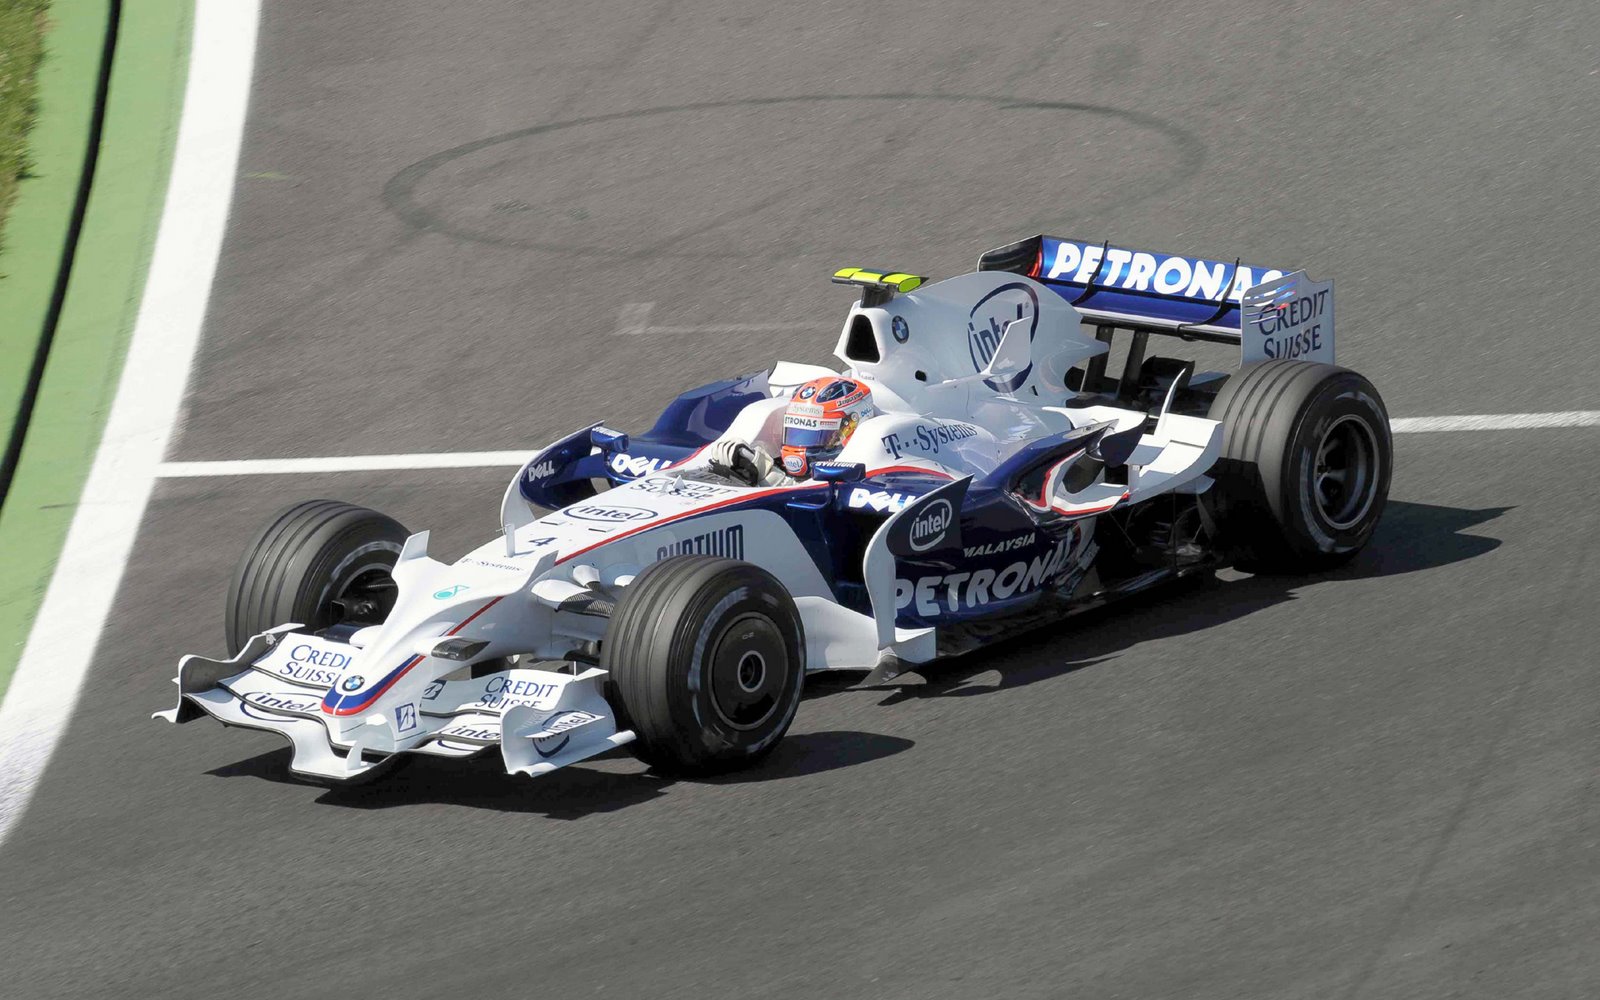 [Robert+Kubica+BMW+Sauber+Saturday+Qualifying+session+France+Magny+Cours,+F1+2008++33.jpg]